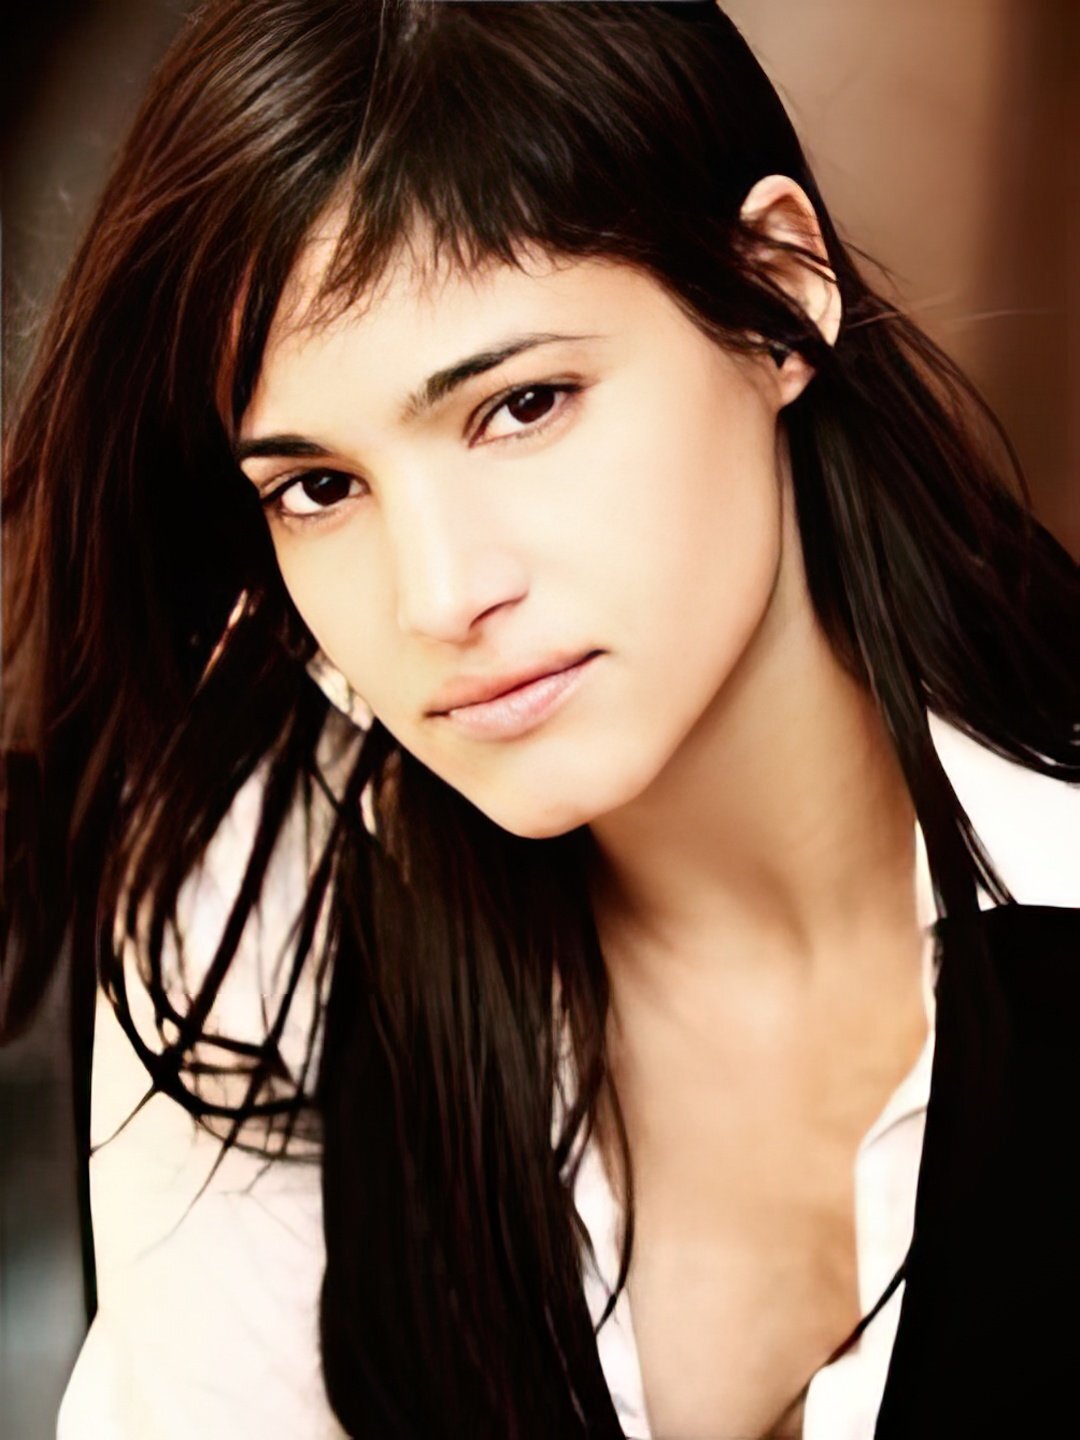 Sofia Boutella who are her parents